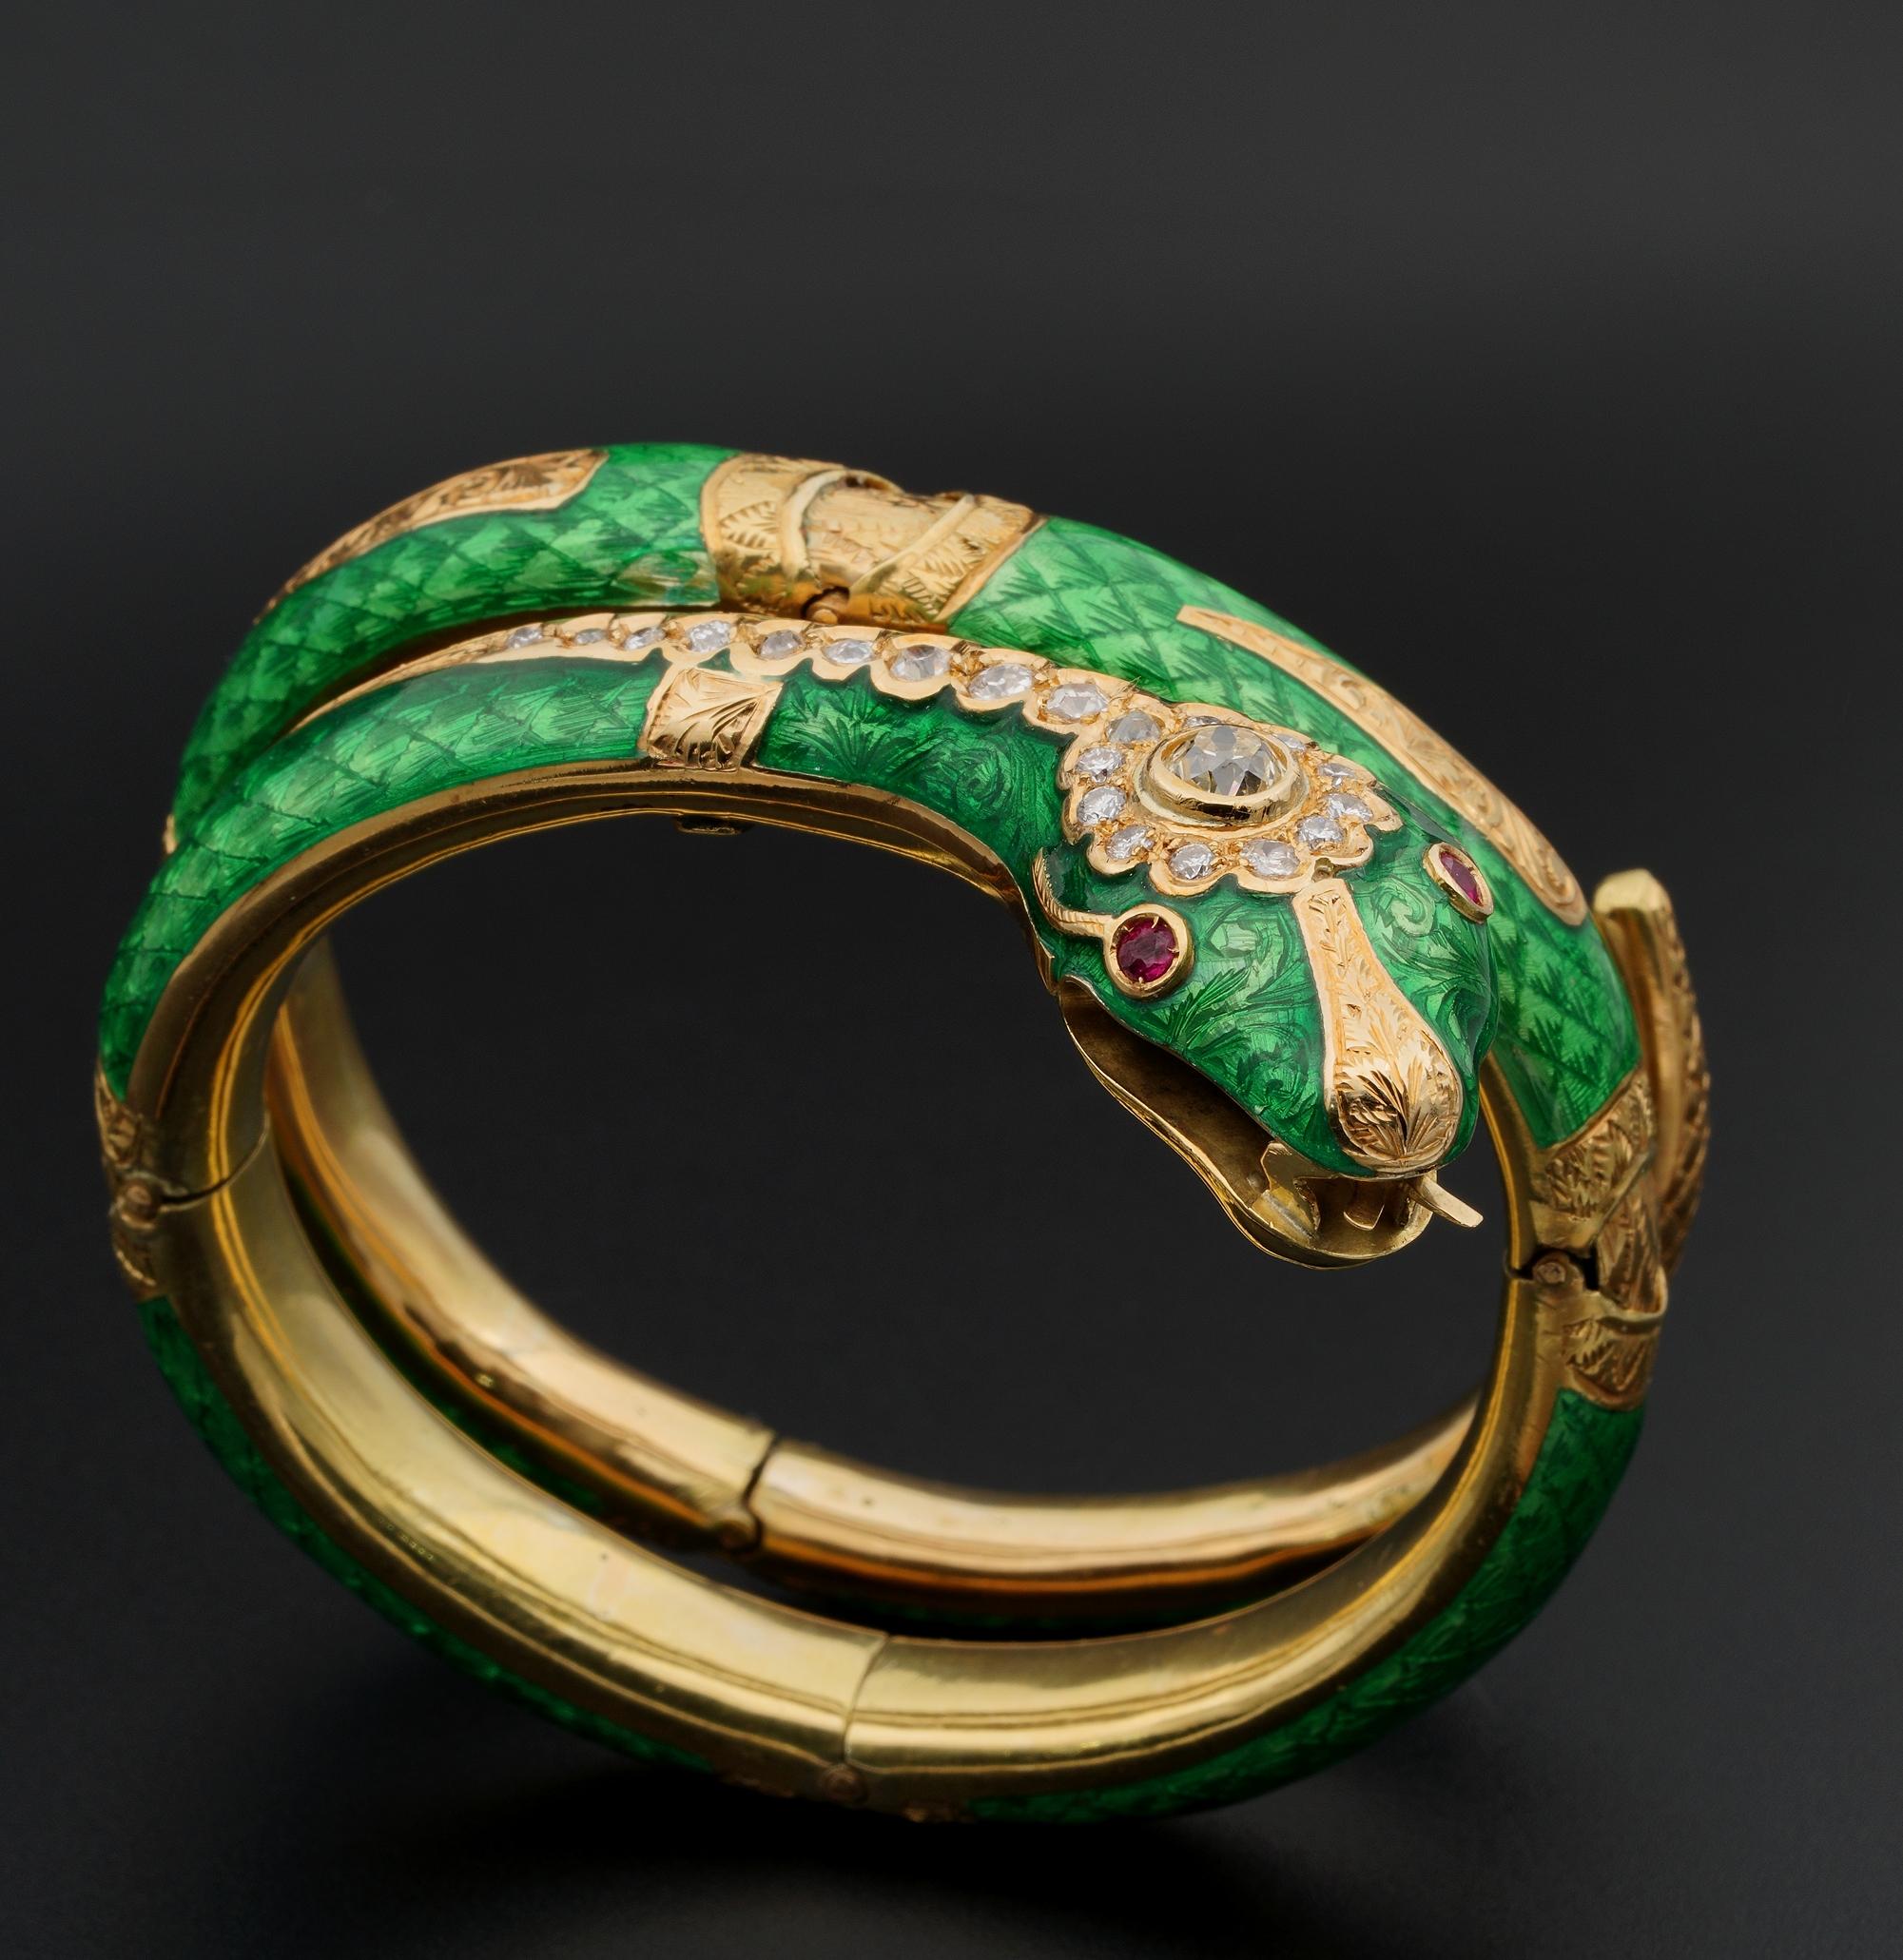 This marvelous Snake bangle is Victorian period 1890 ca
Impressive in design wrapping twice around the wrist with a large head and spectacular guilloche enamel work of rich luxurious Green color with gold carved inserts for effect
Head is enhanced